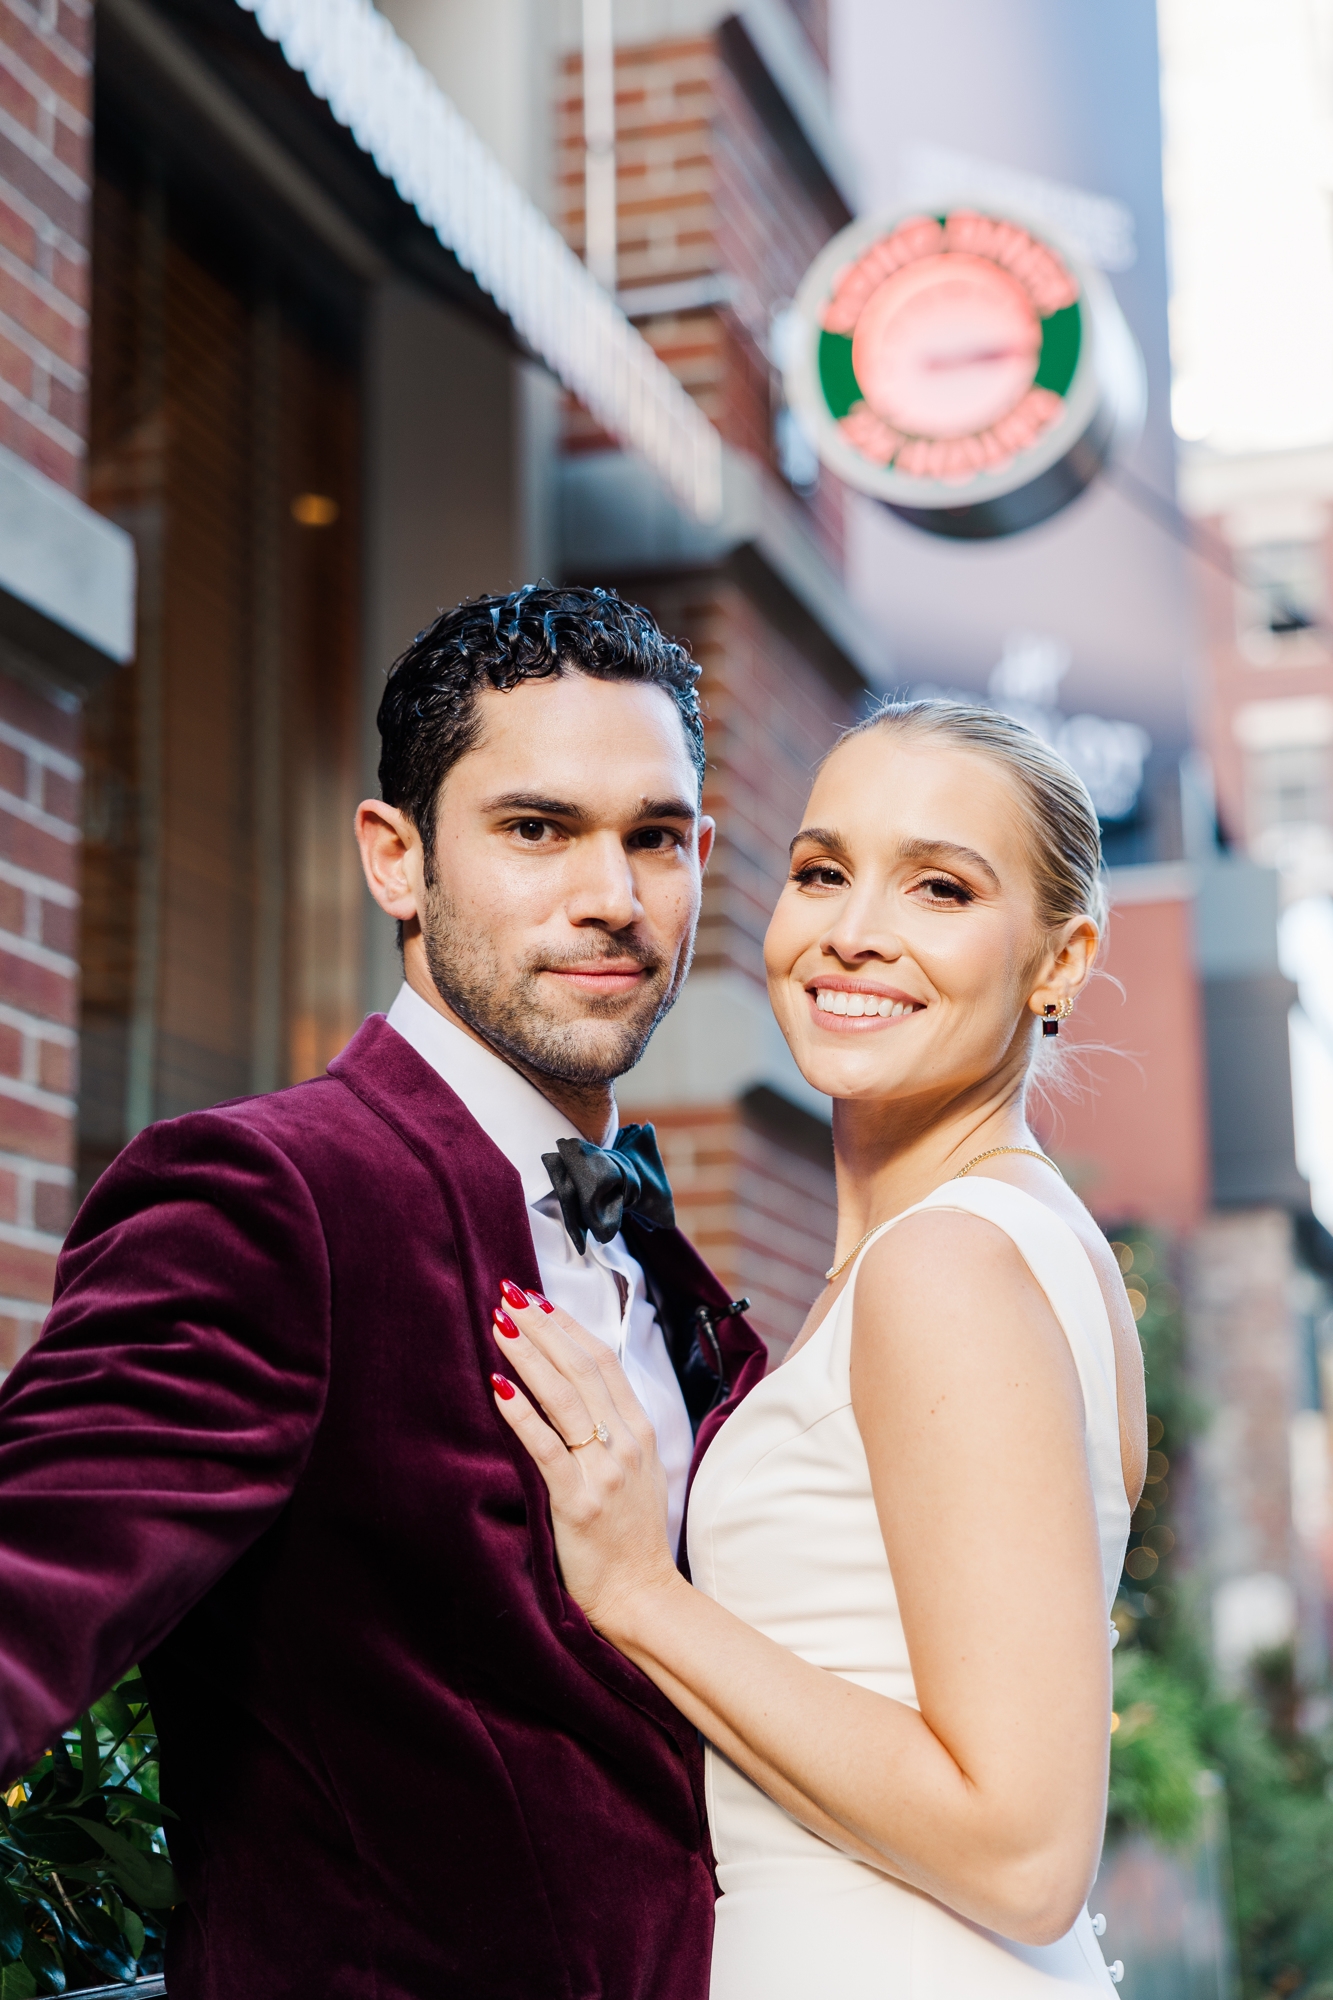 Flawless New York Wedding Photography at City Winery